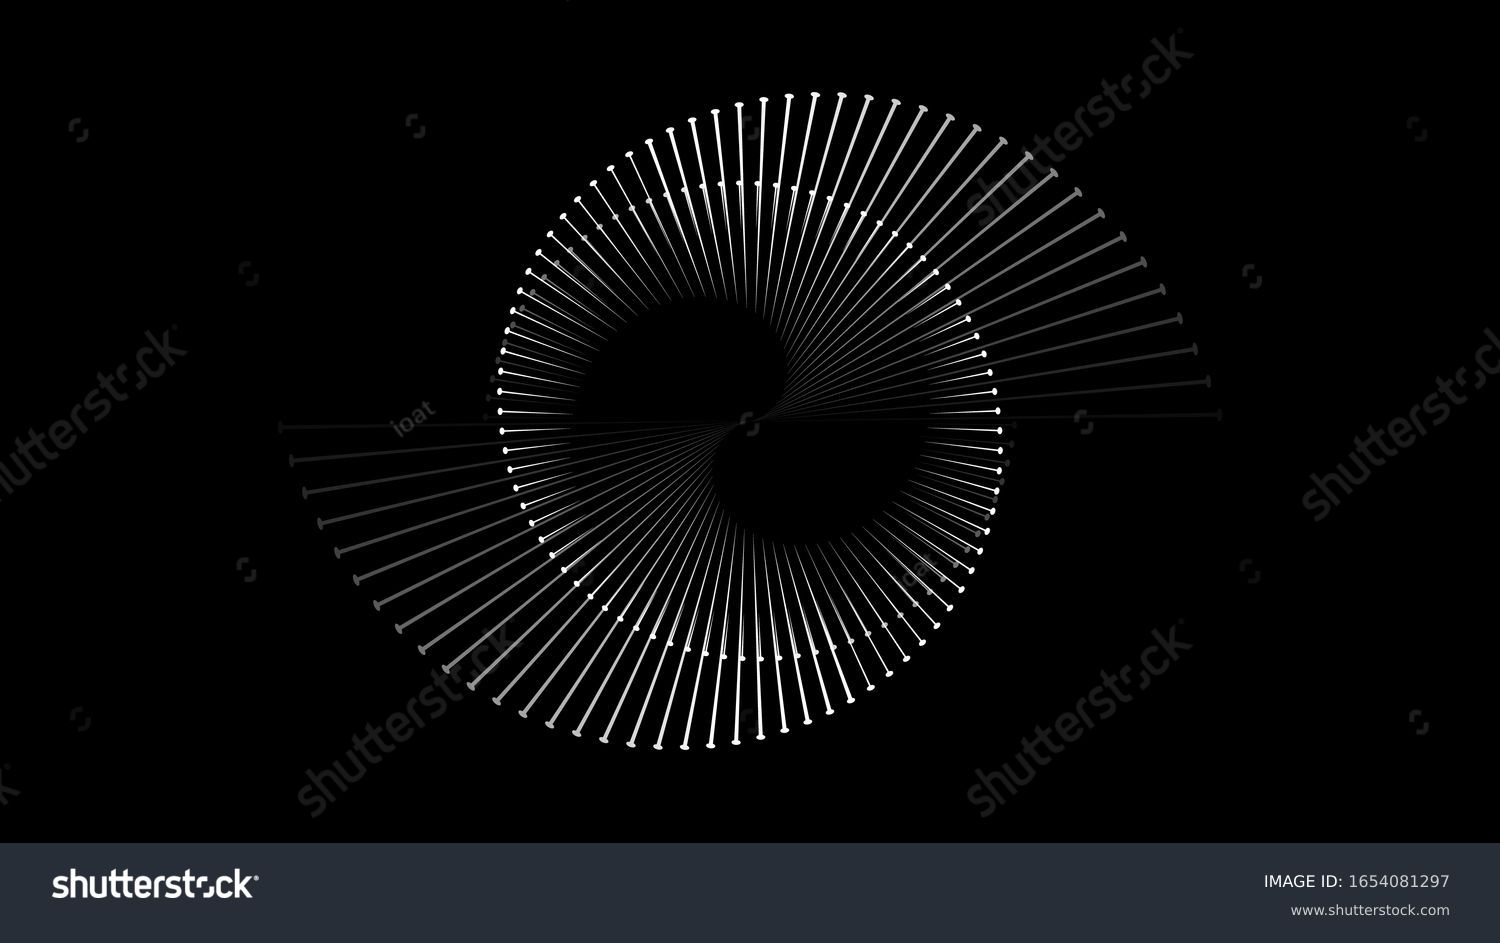 Spiral sound wave rhythm line dynamic abstract vector background #1654081297